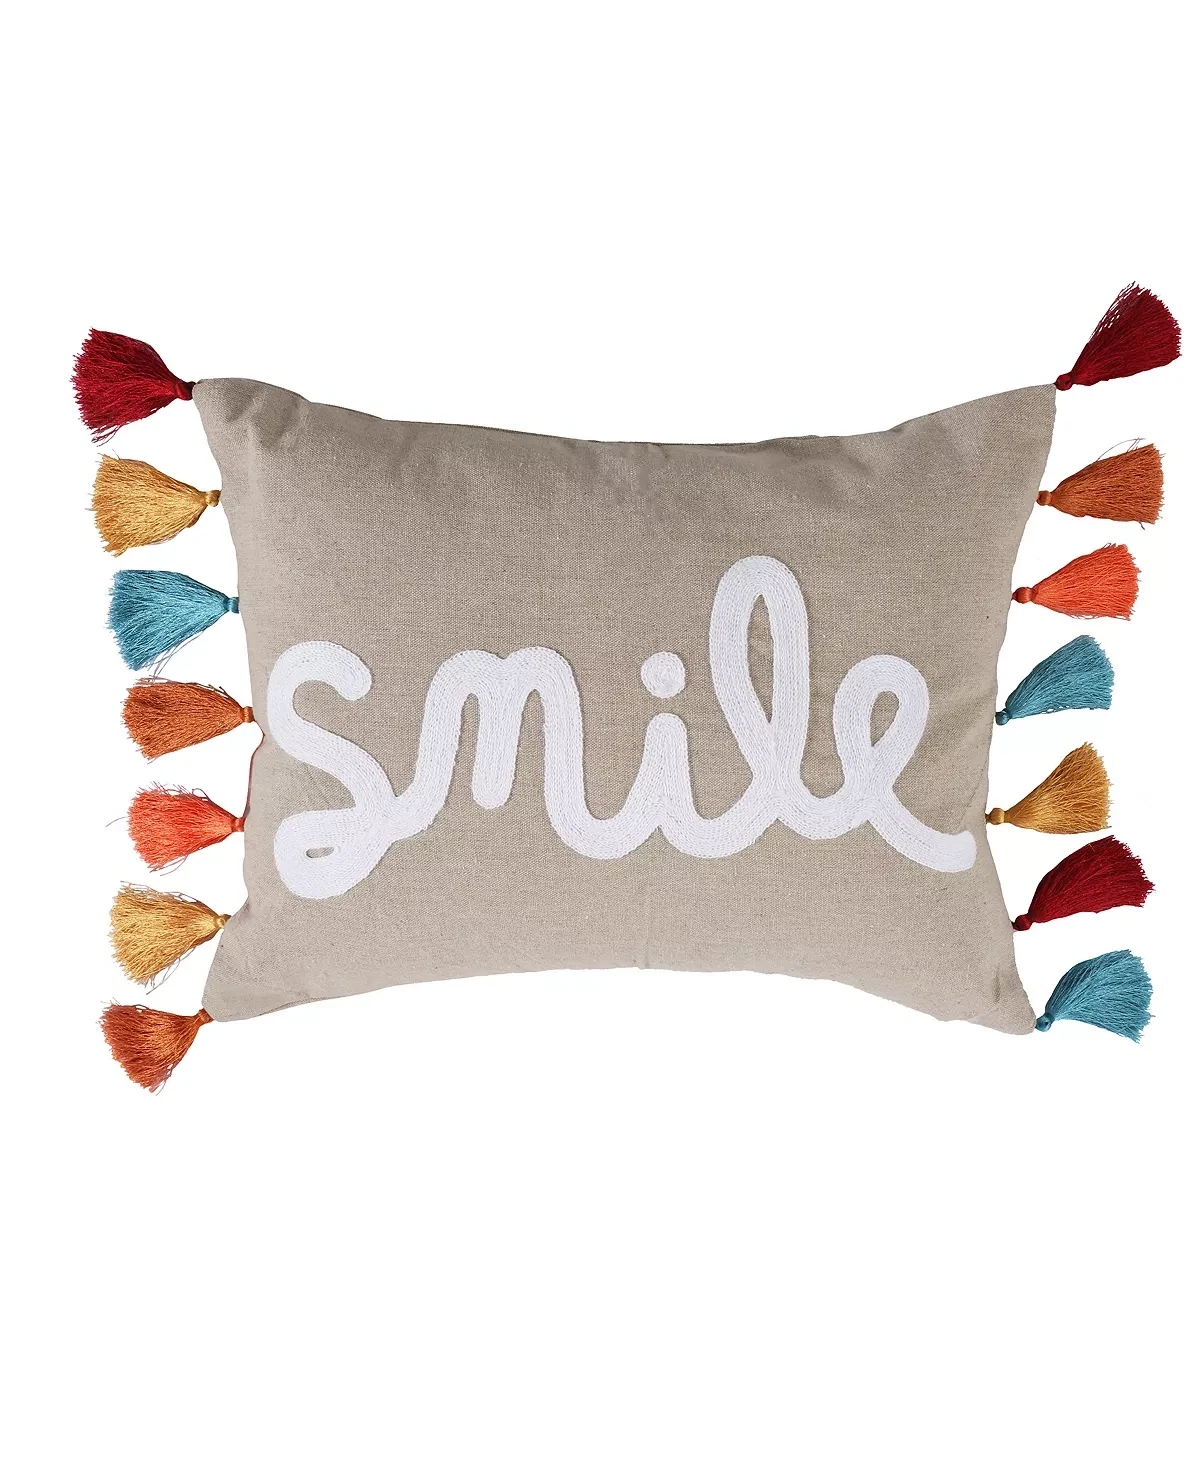 LEVTEX HOME Amelie Beige, White, Multicolored Tassels, Smile Embroidered 14 in. X 18 in. Throw Pillow